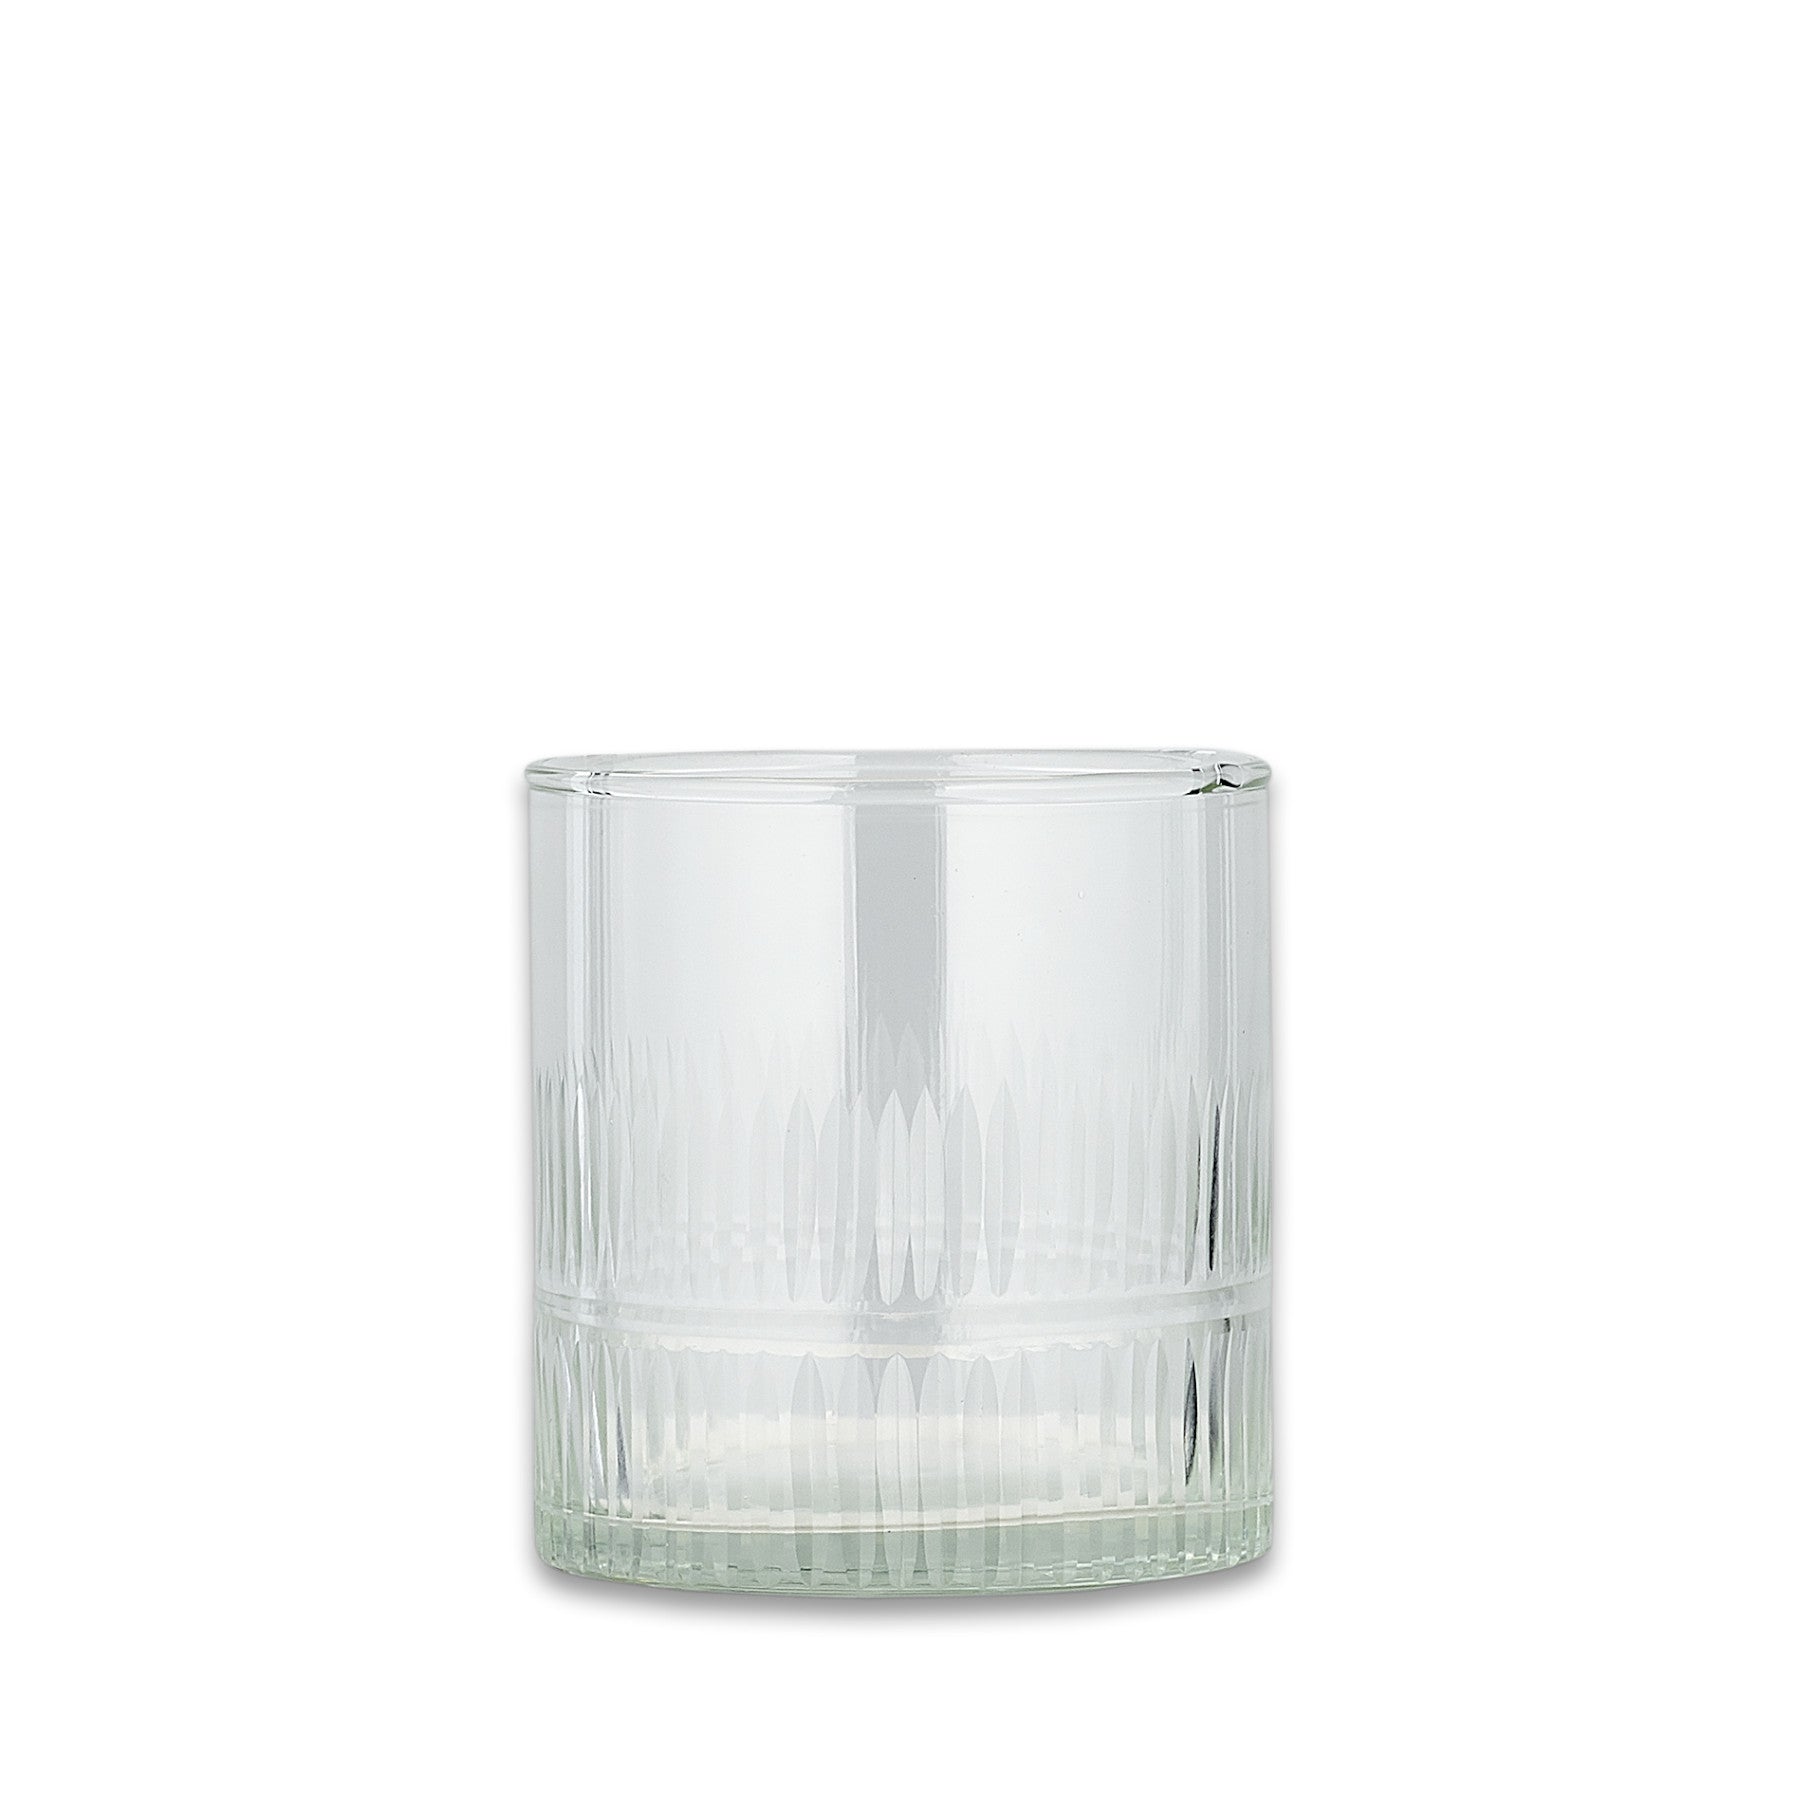 Clear glass tumbler with ribbed design on white background